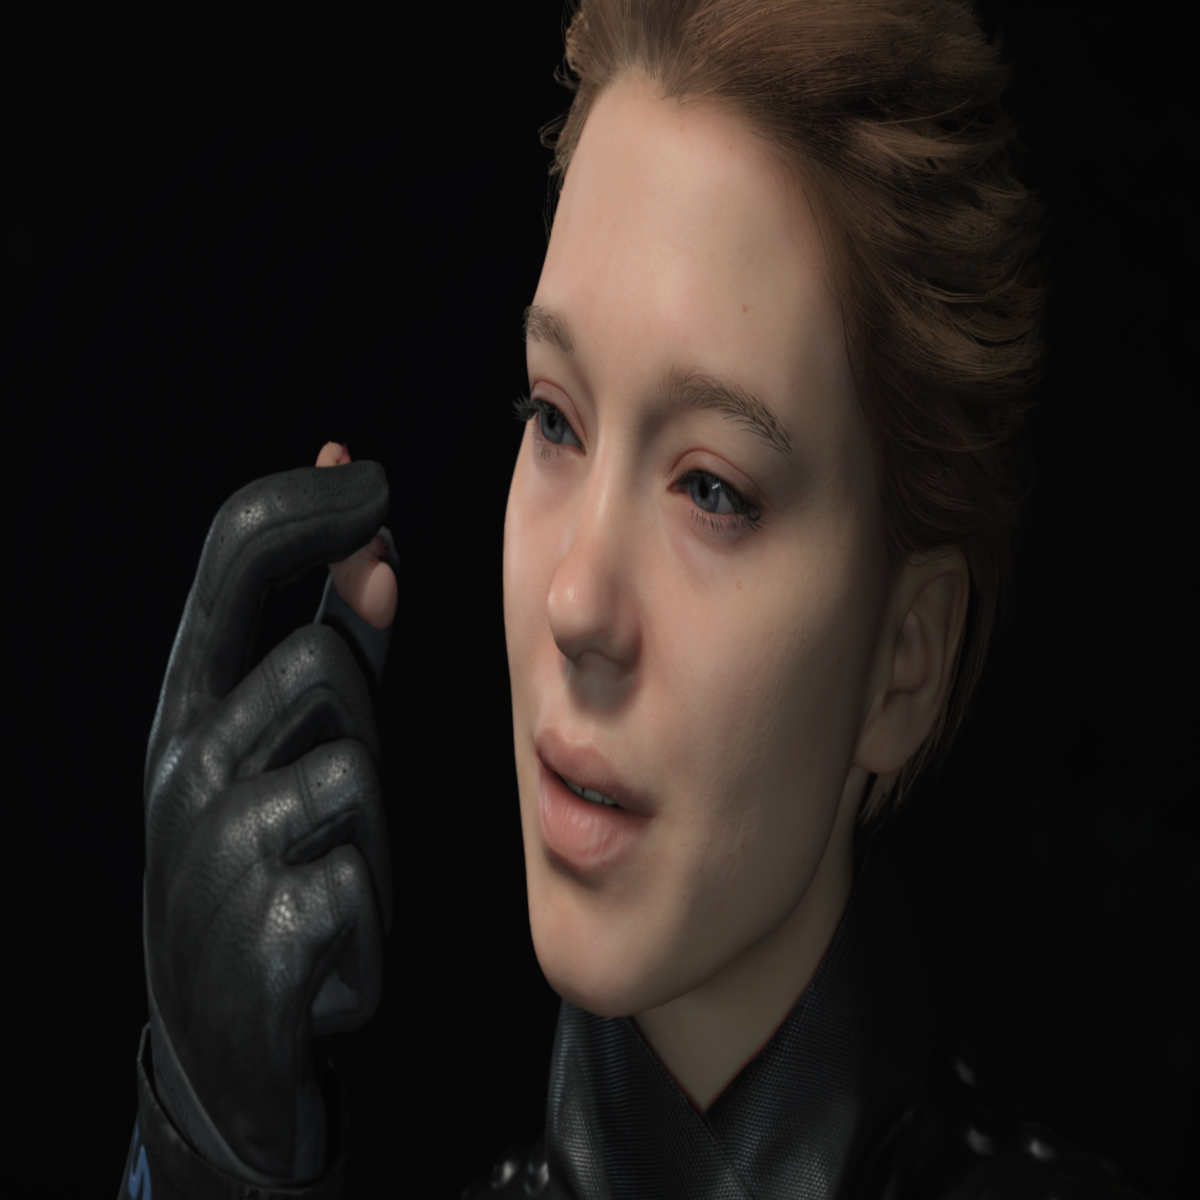 Death Stranding PS4 1.13 Update Introduces Save Data Transfer Option